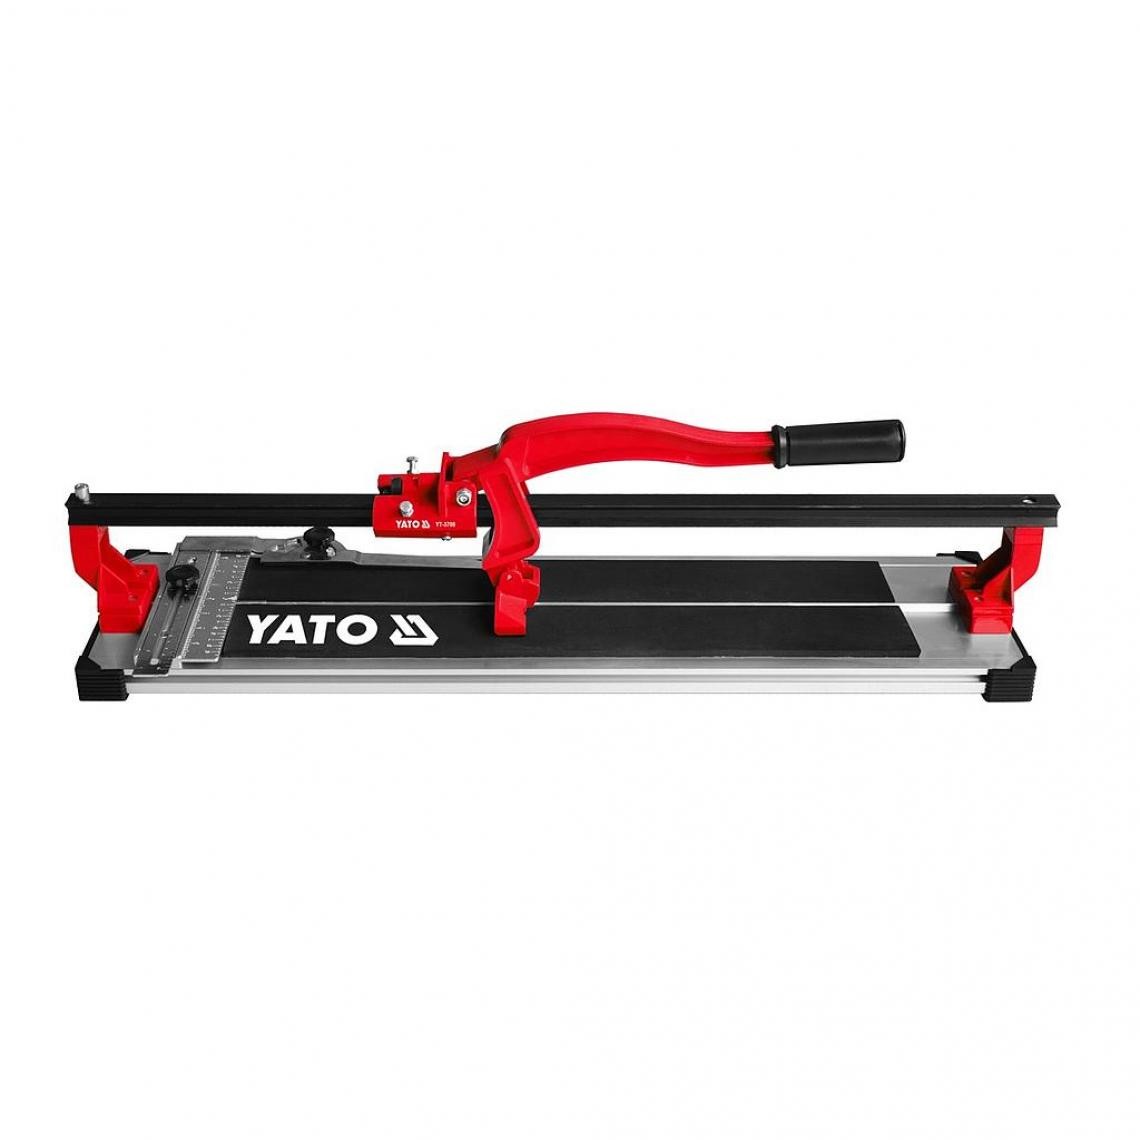 Yato - Yato - Coupe carrelage 800 mm - YT-3708 - Outils de coupe